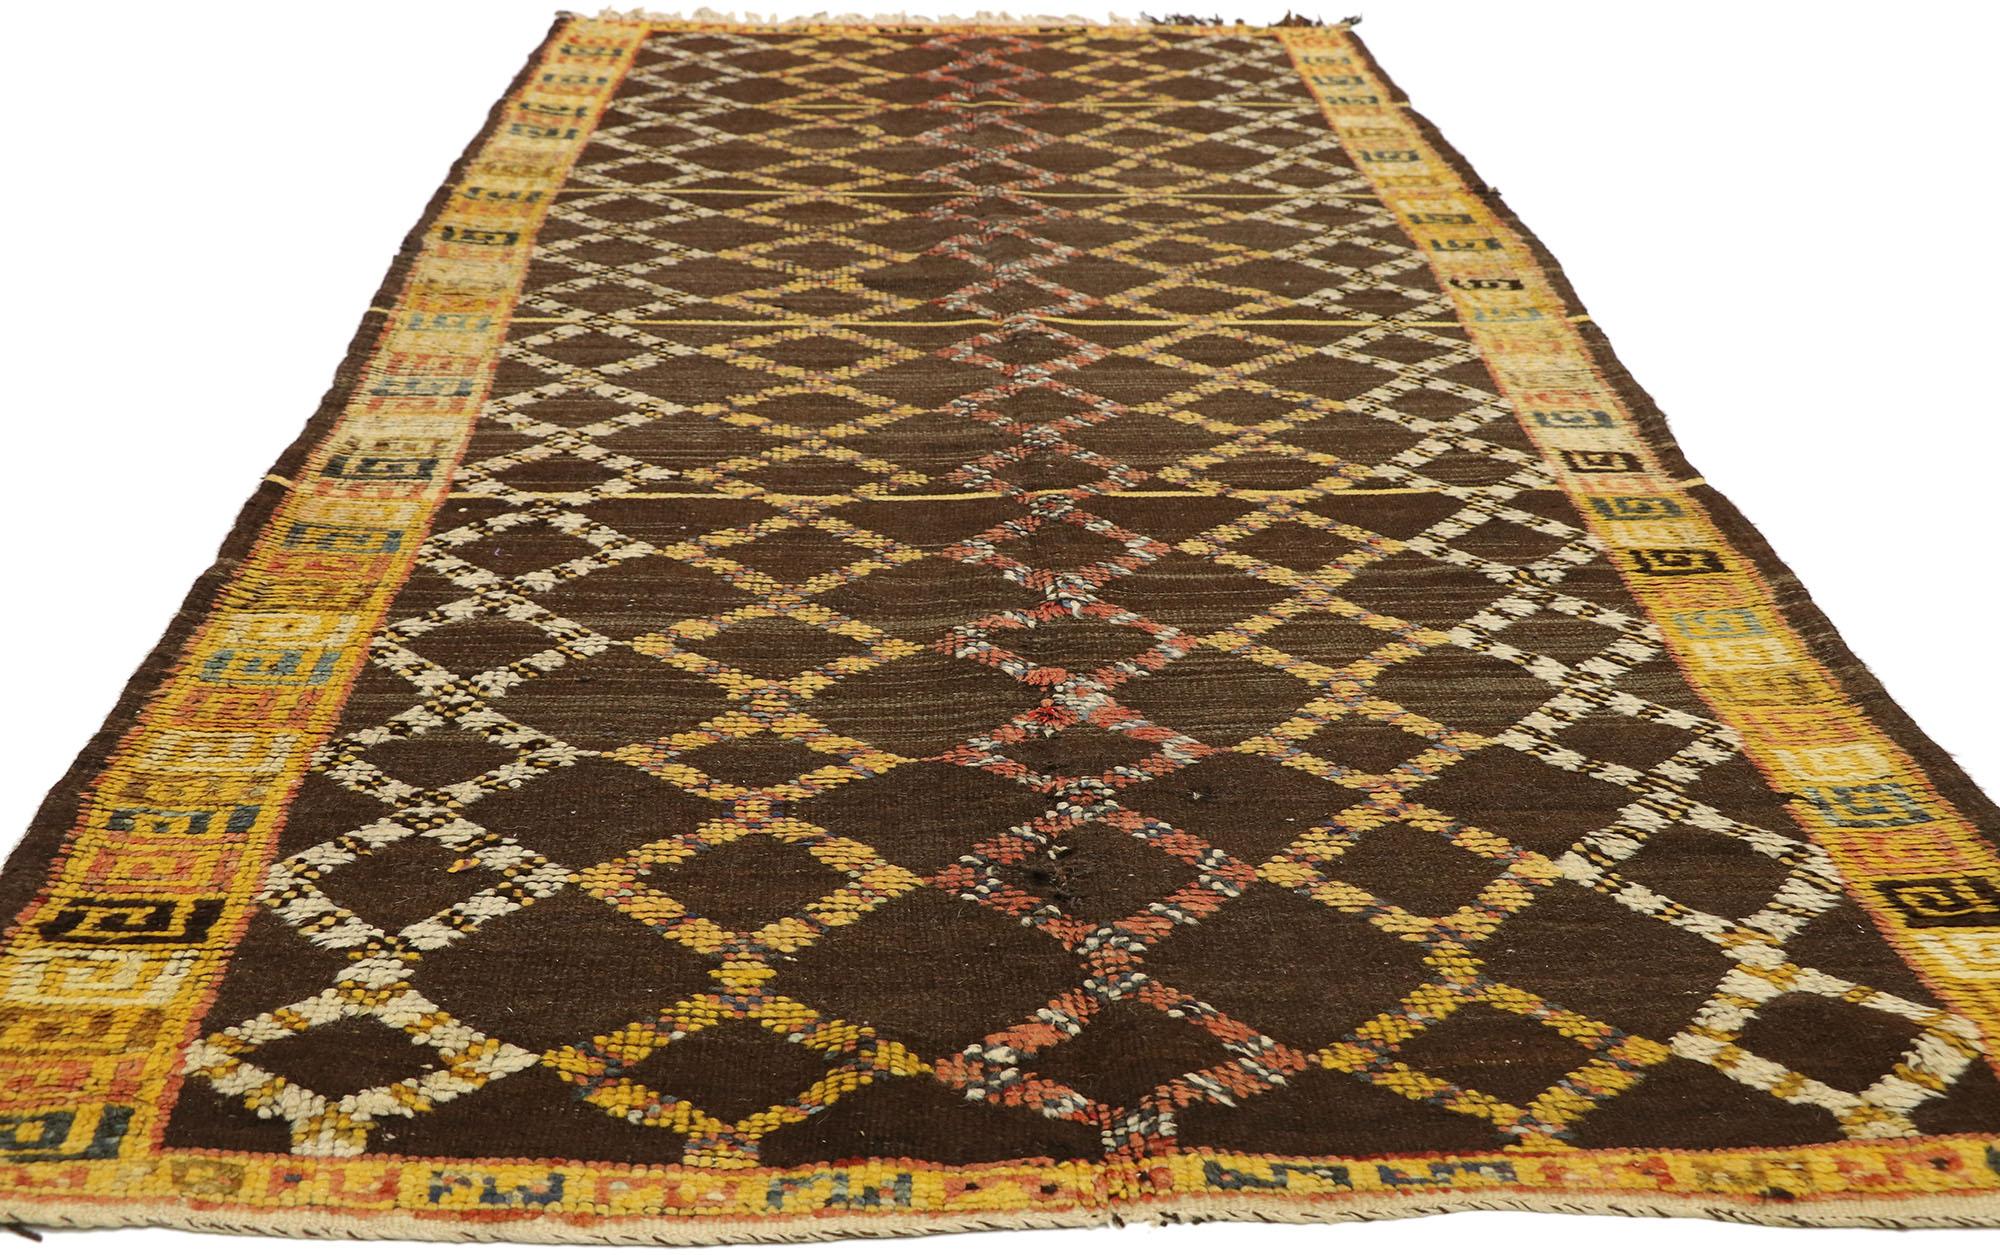 20196 Vintage Taznakht Moroccan Rug, 04'05 x 10'00. Step into the captivating narrative of the Taznakht Tribe's rich heritage, where artisans of the High Atlas Mountains in southern Morocco intricately fashioned this hand-knotted wool vintage Ait